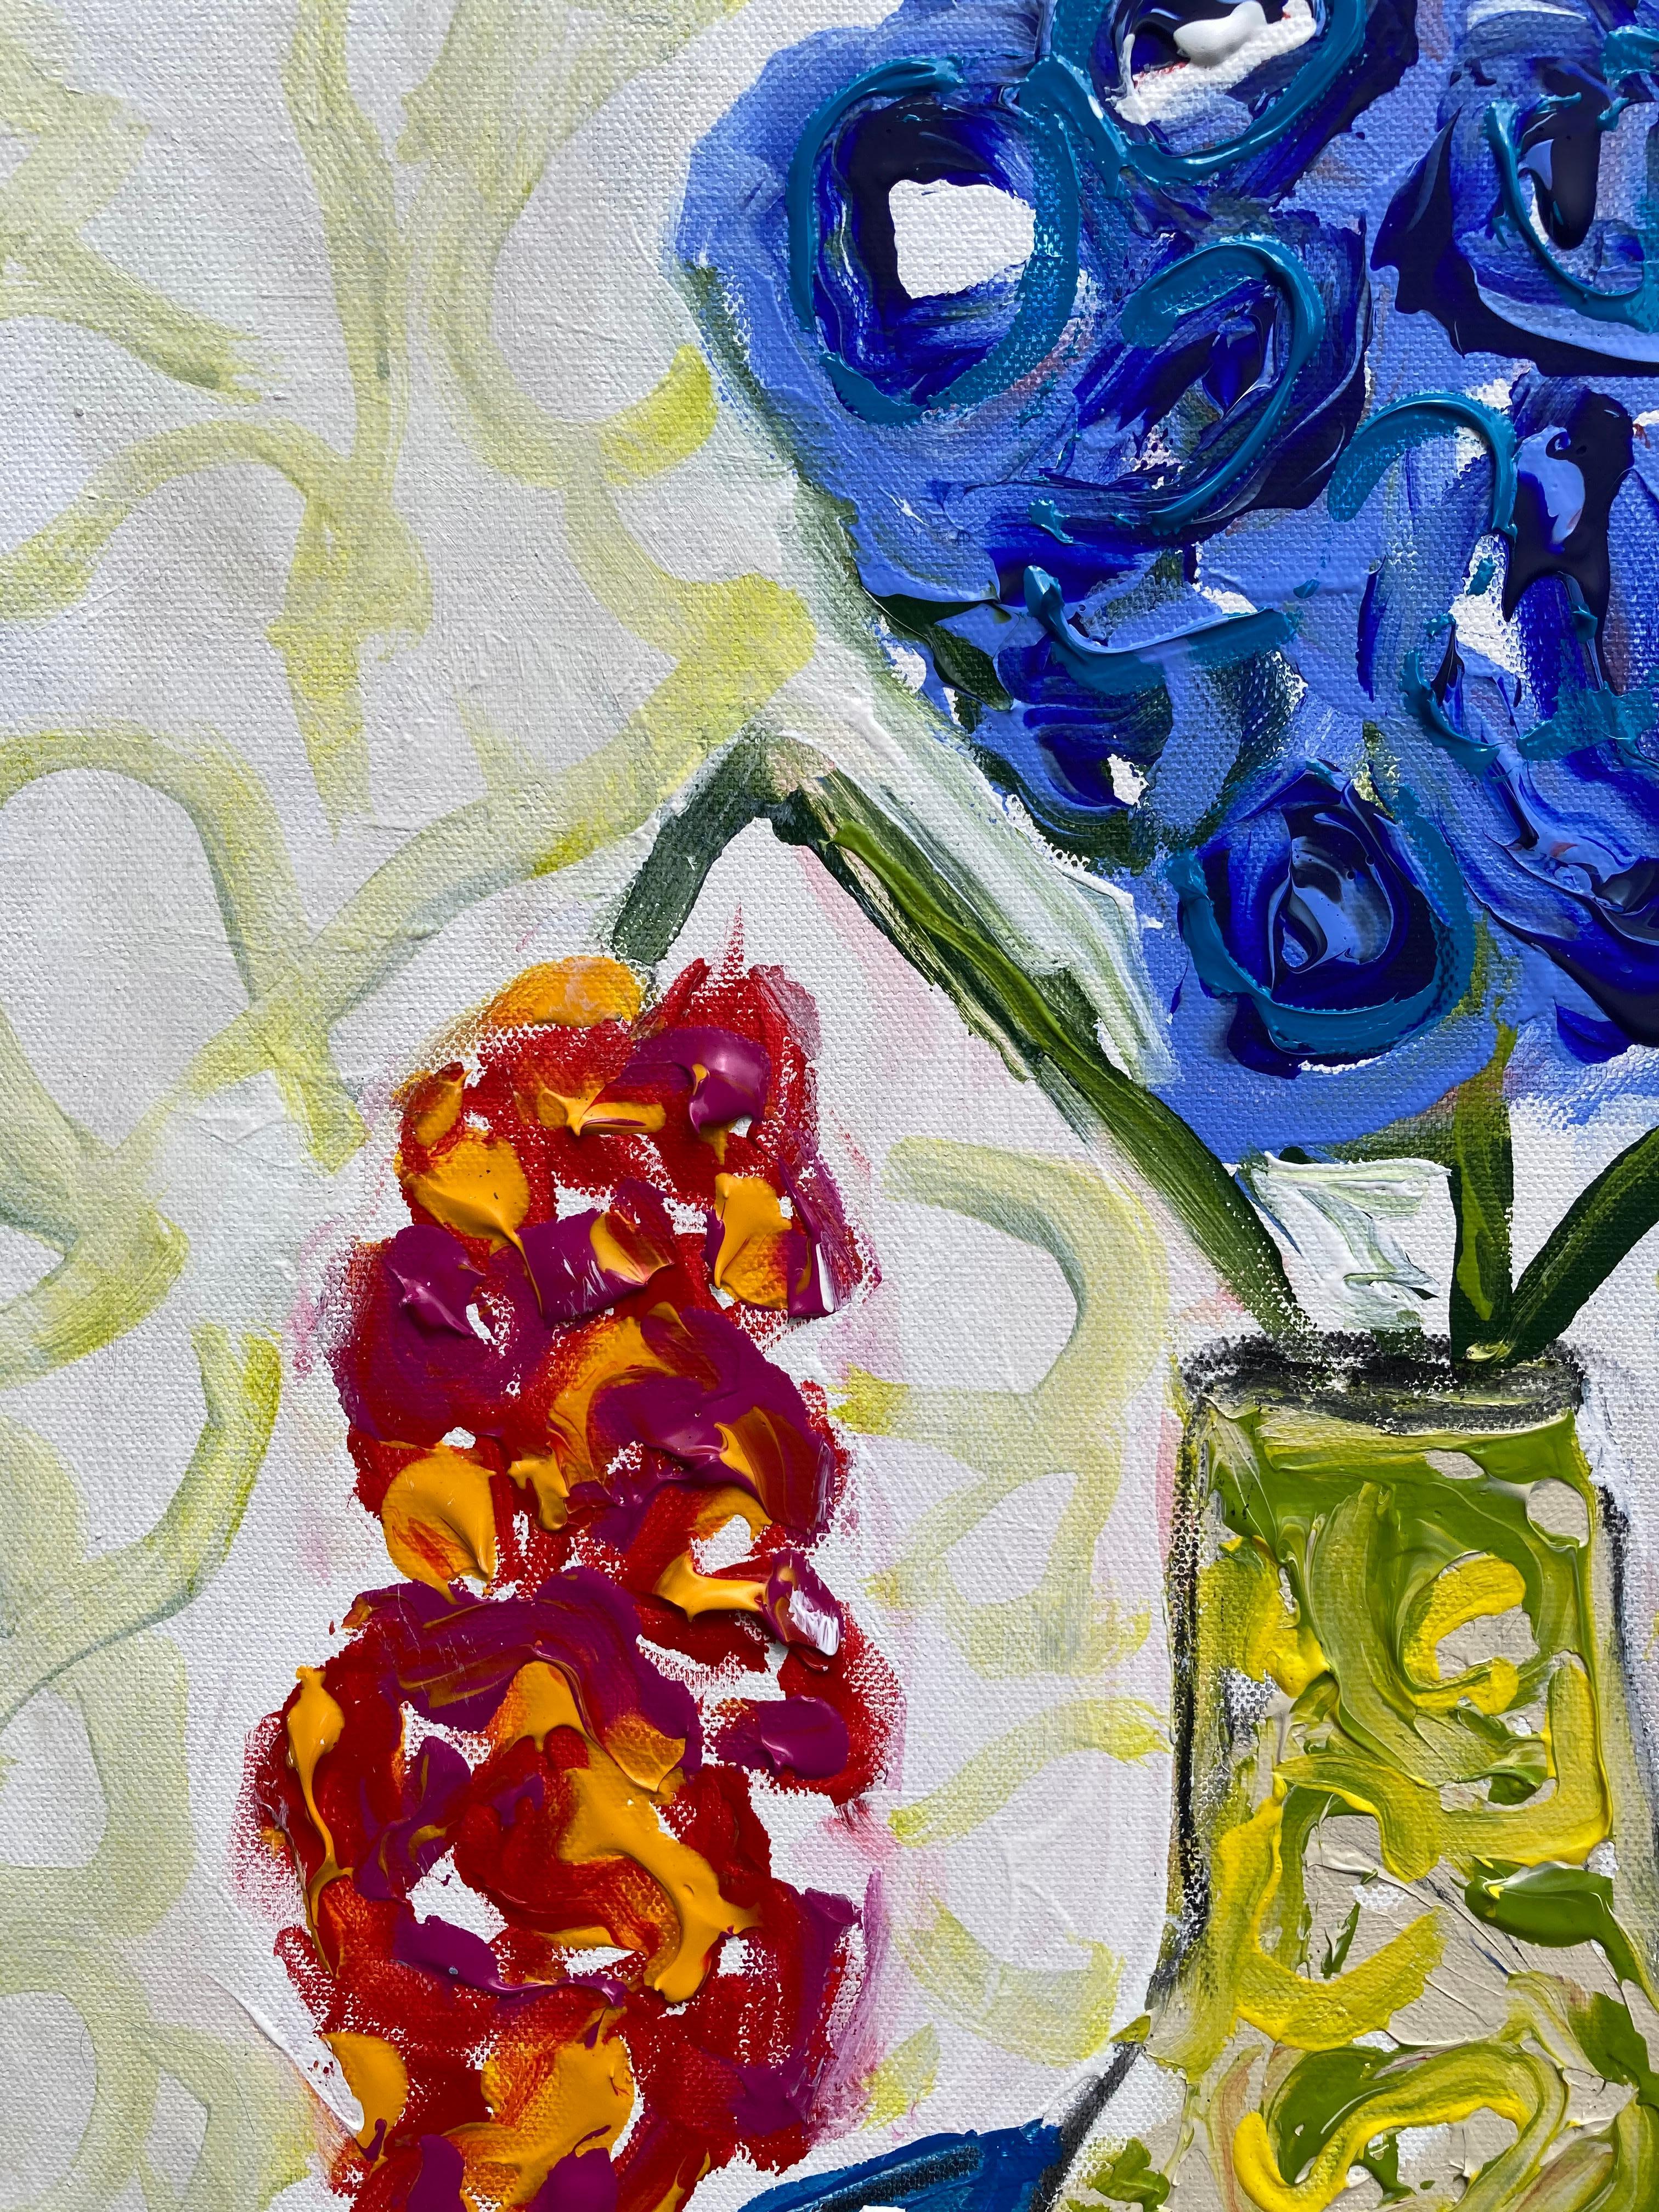 Flowers Never Seen #3 - Painting by G. Campbell Lyman